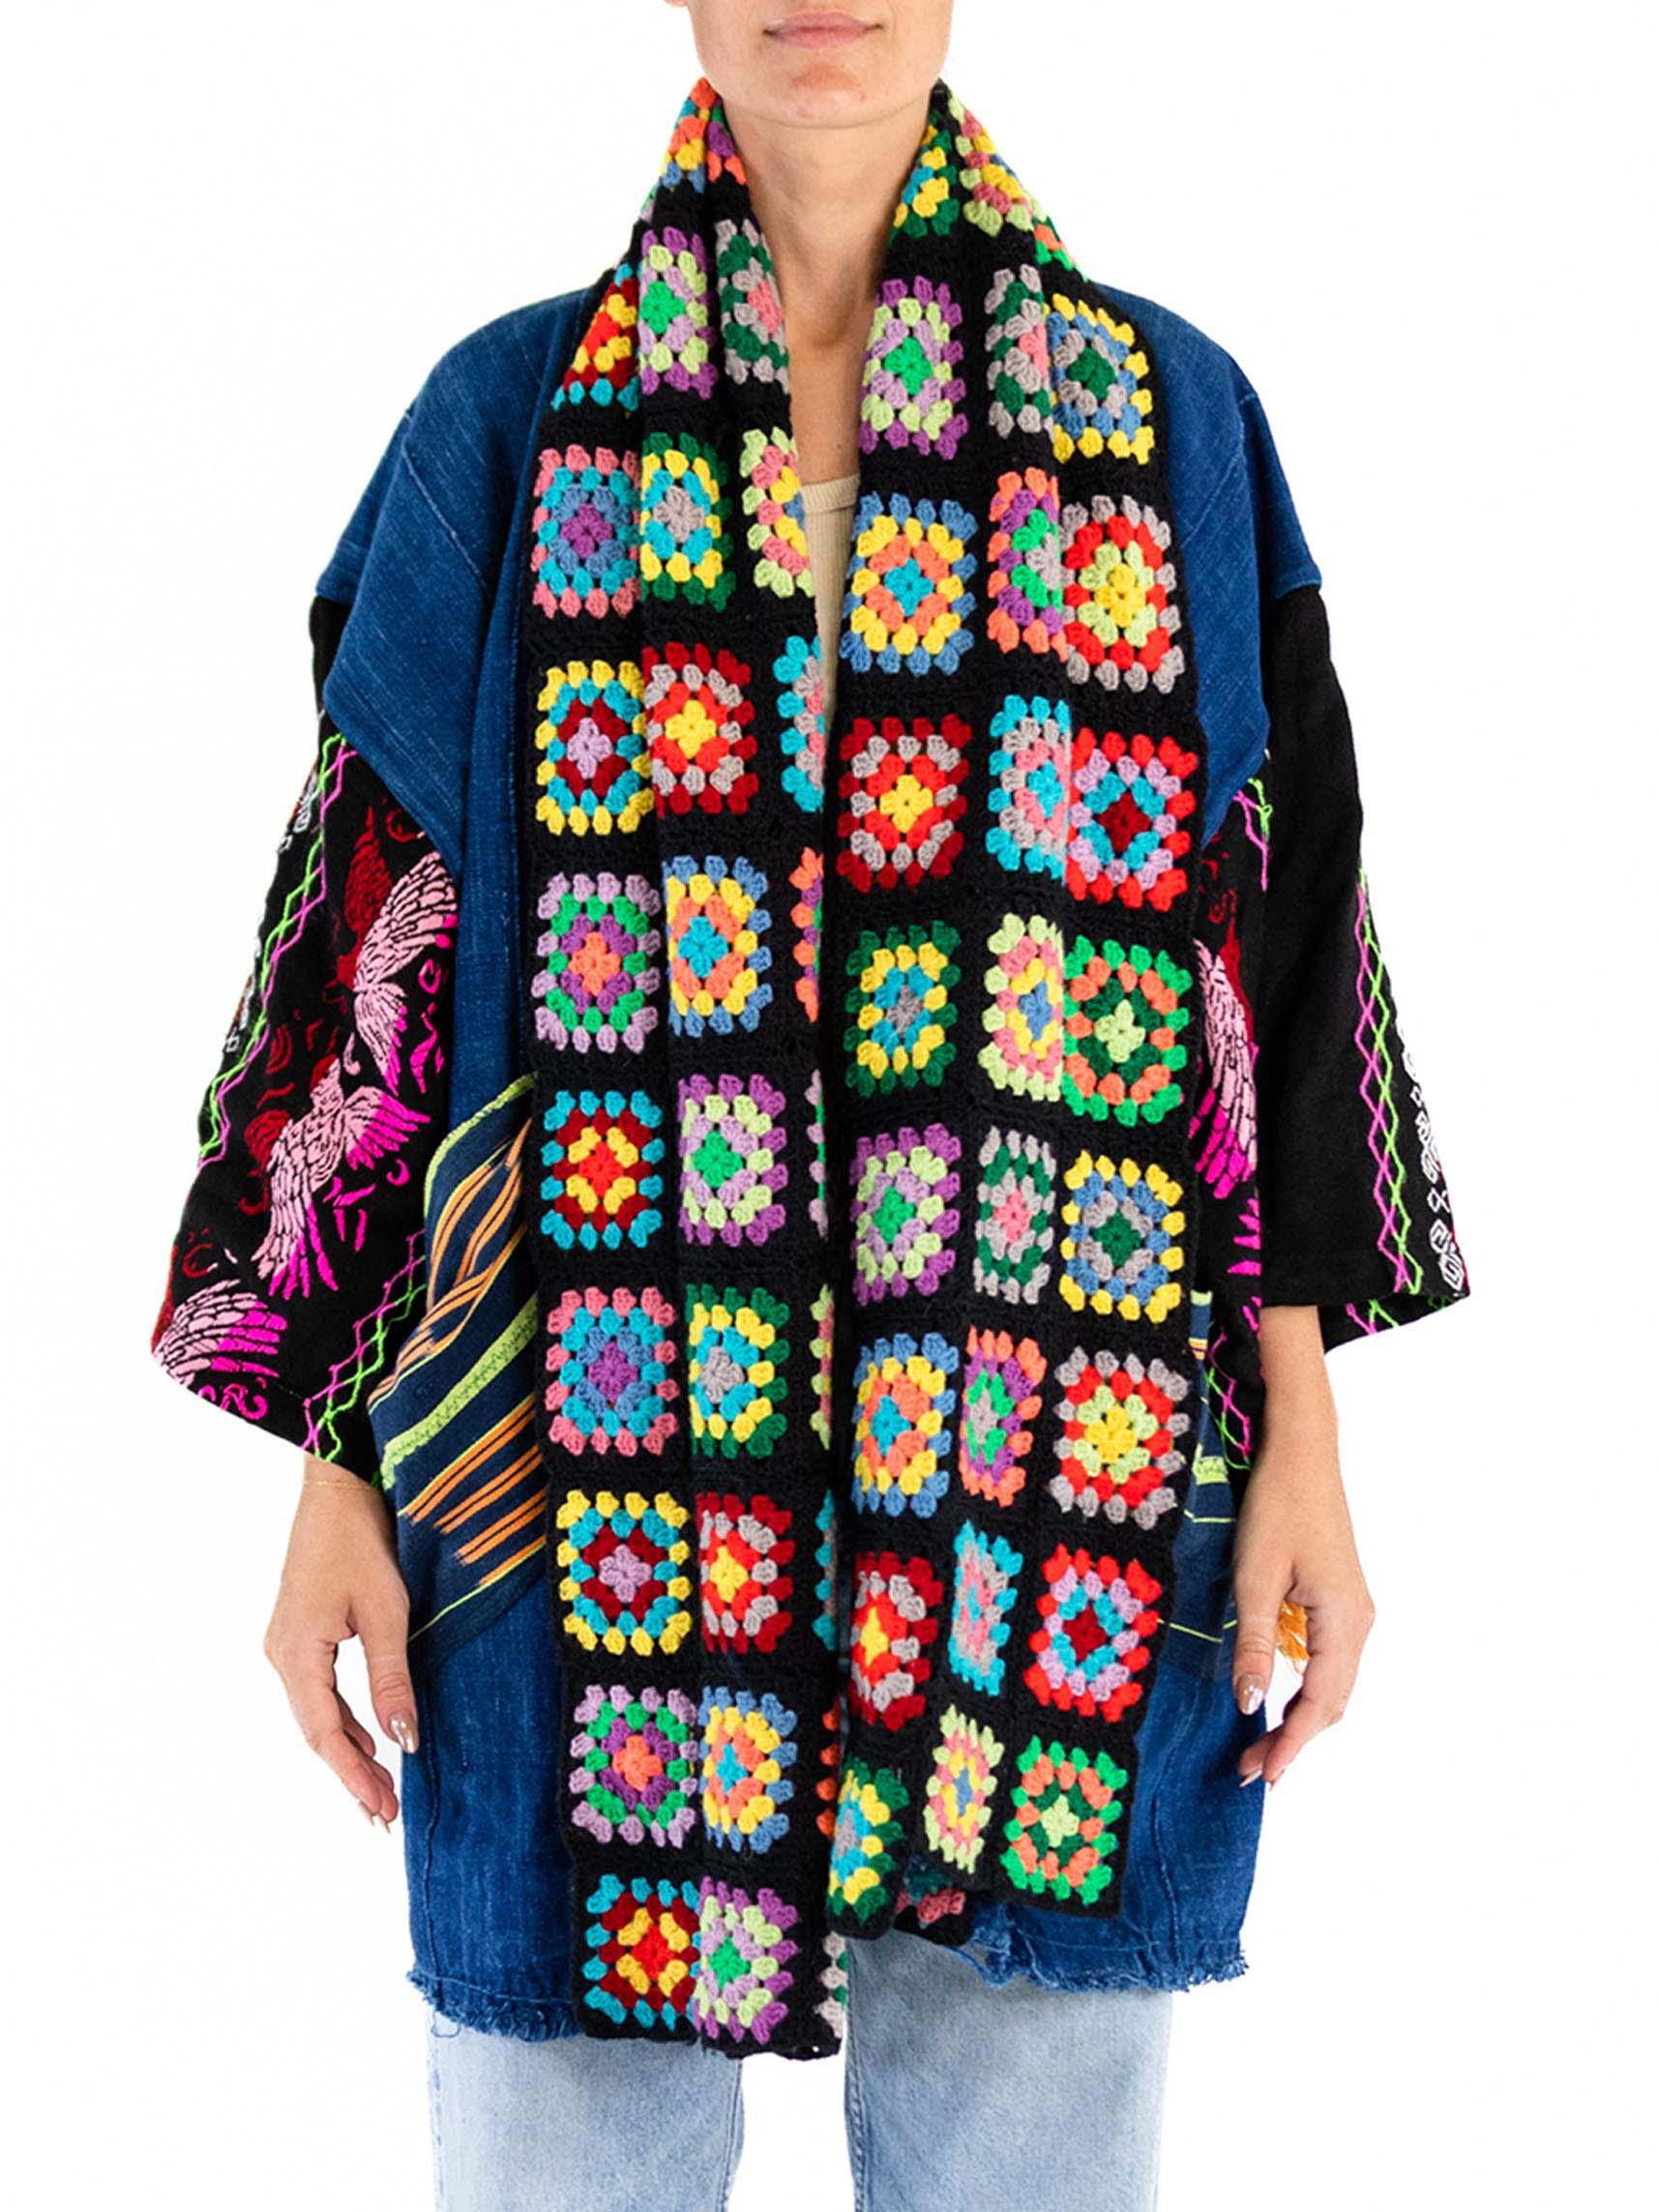 Morphew Collection West African Indigo Cotton Multi Color Crochet Trim Duster
MORPHEW COLLECTION is made entirely by hand in our NYC Ateliér of rare antique materials sourced from around the globe. Our sustainable vintage materials represent over a